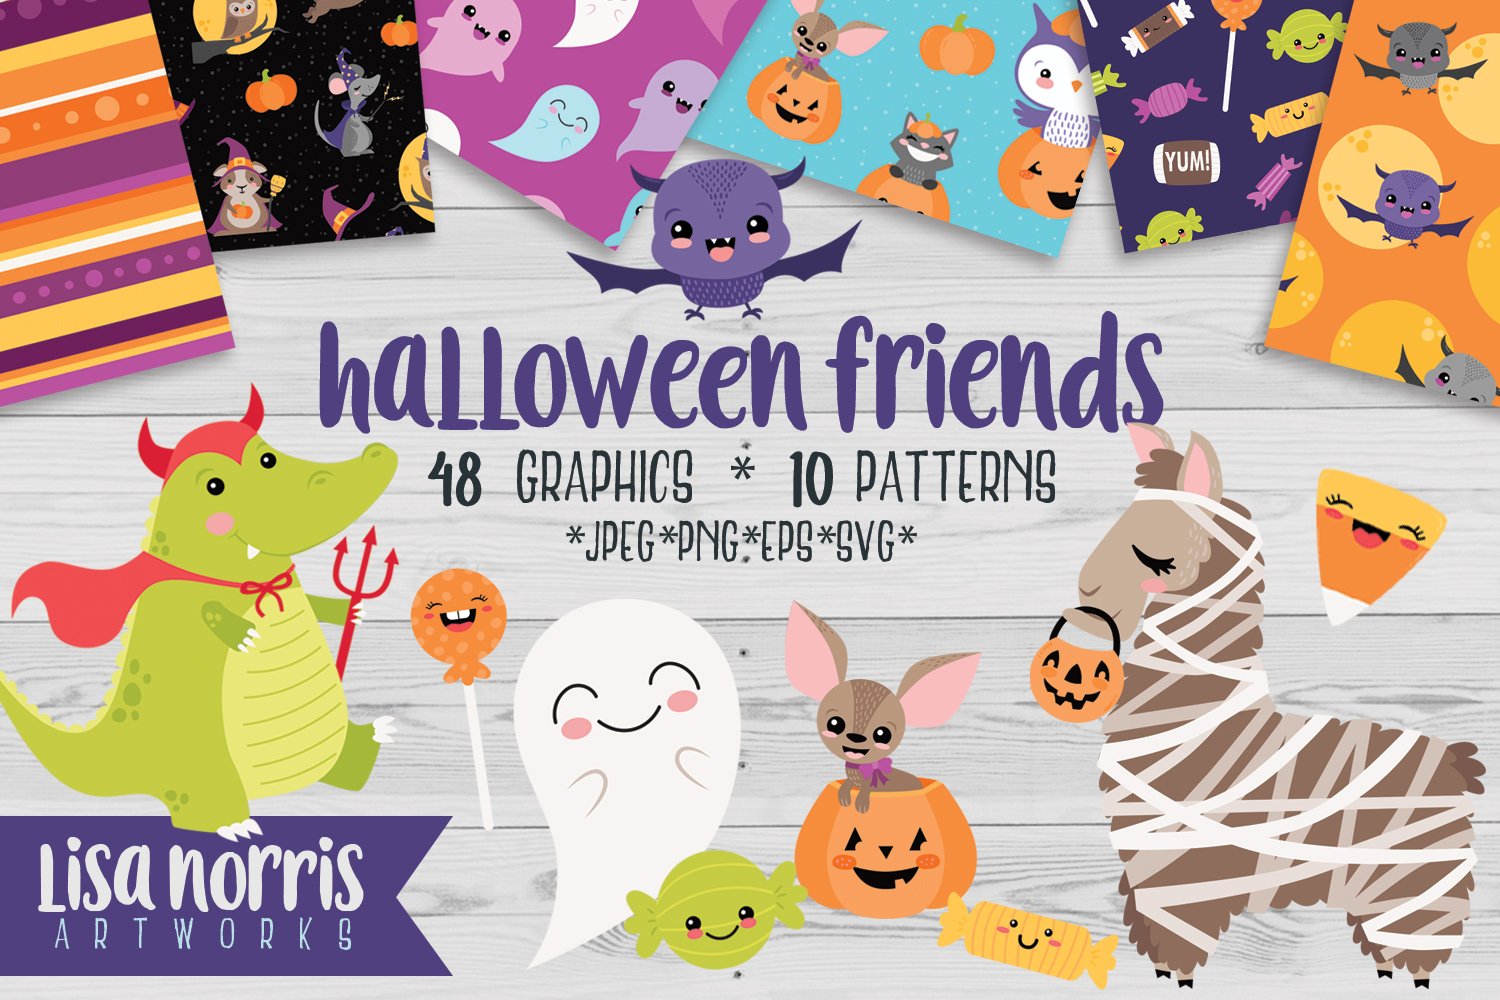 Halloween Friends Clip Art Patterns cover image.